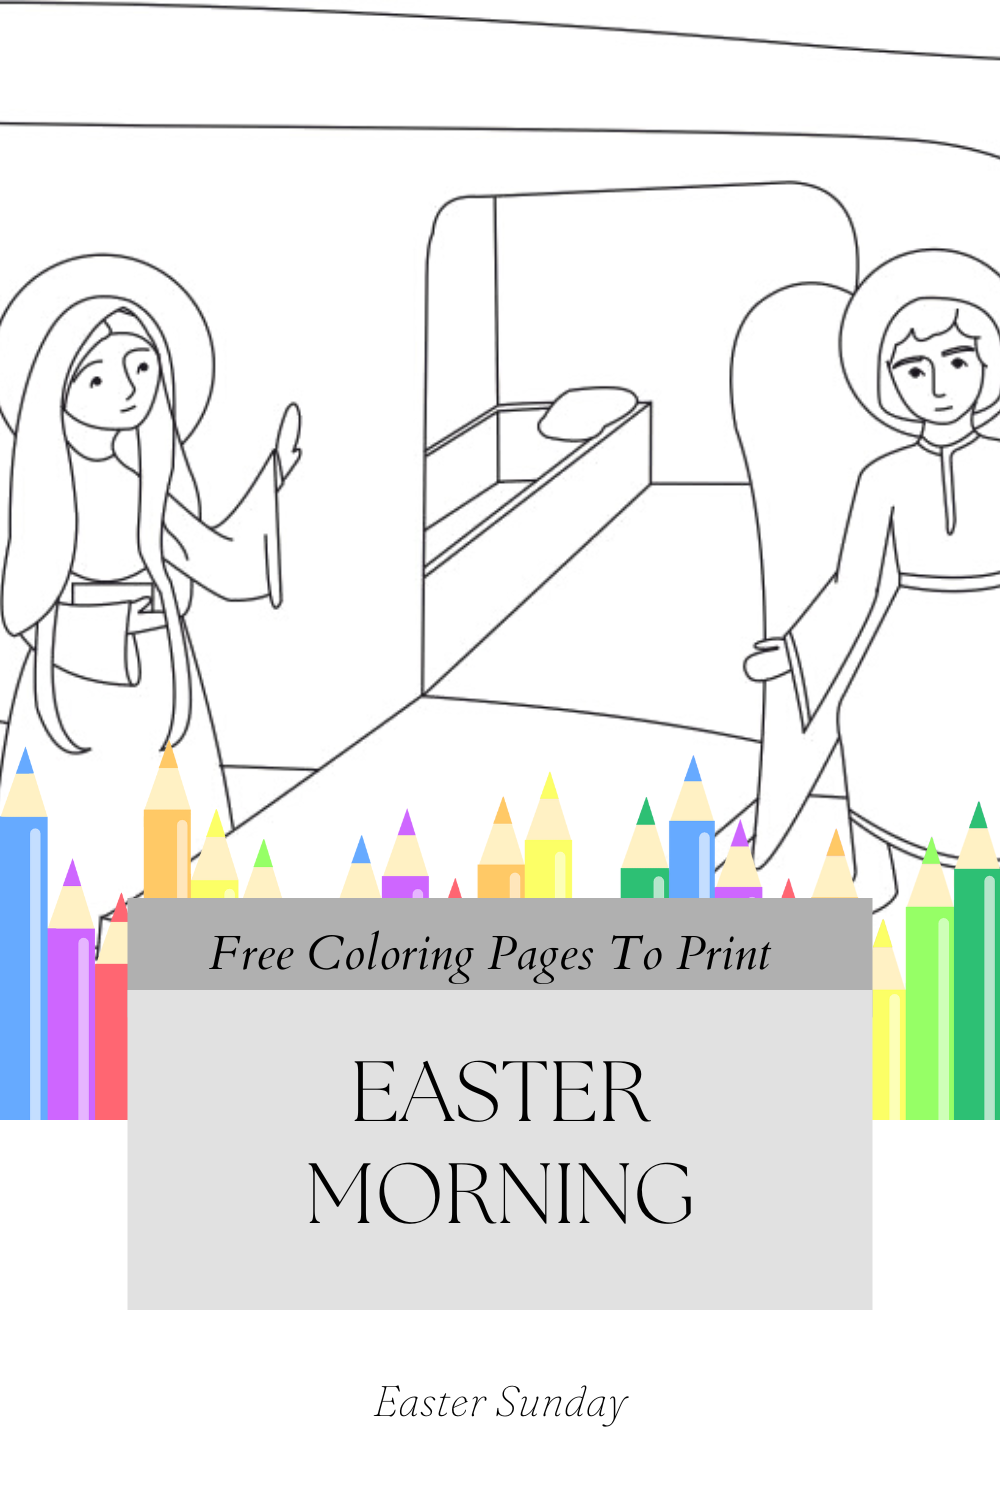 Easter morning coloring page blog image